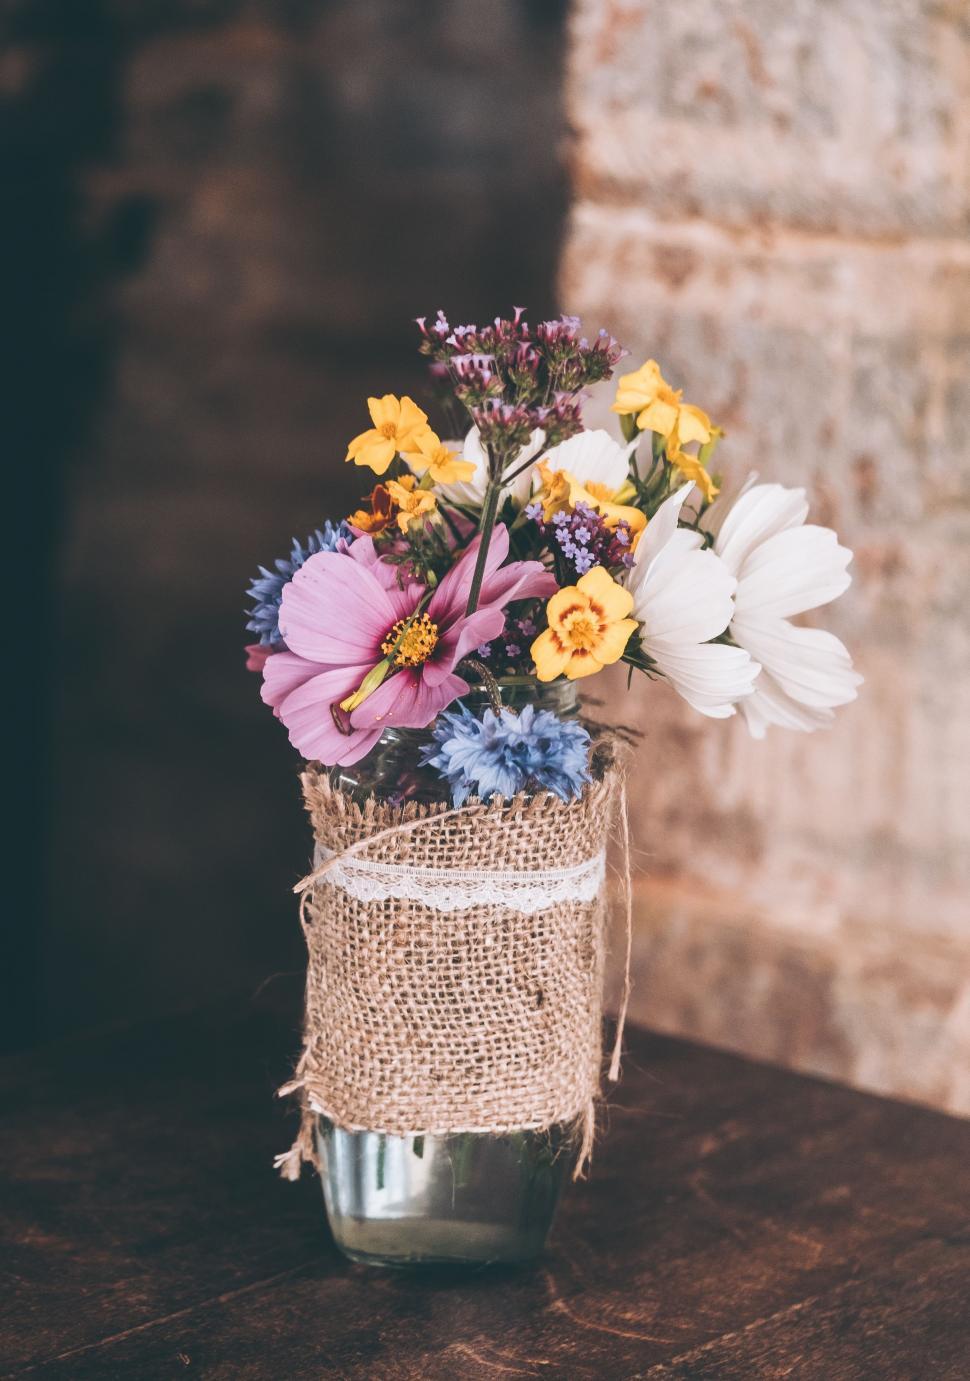 Free Image of Vase Filled With Flowers on Wooden Table 